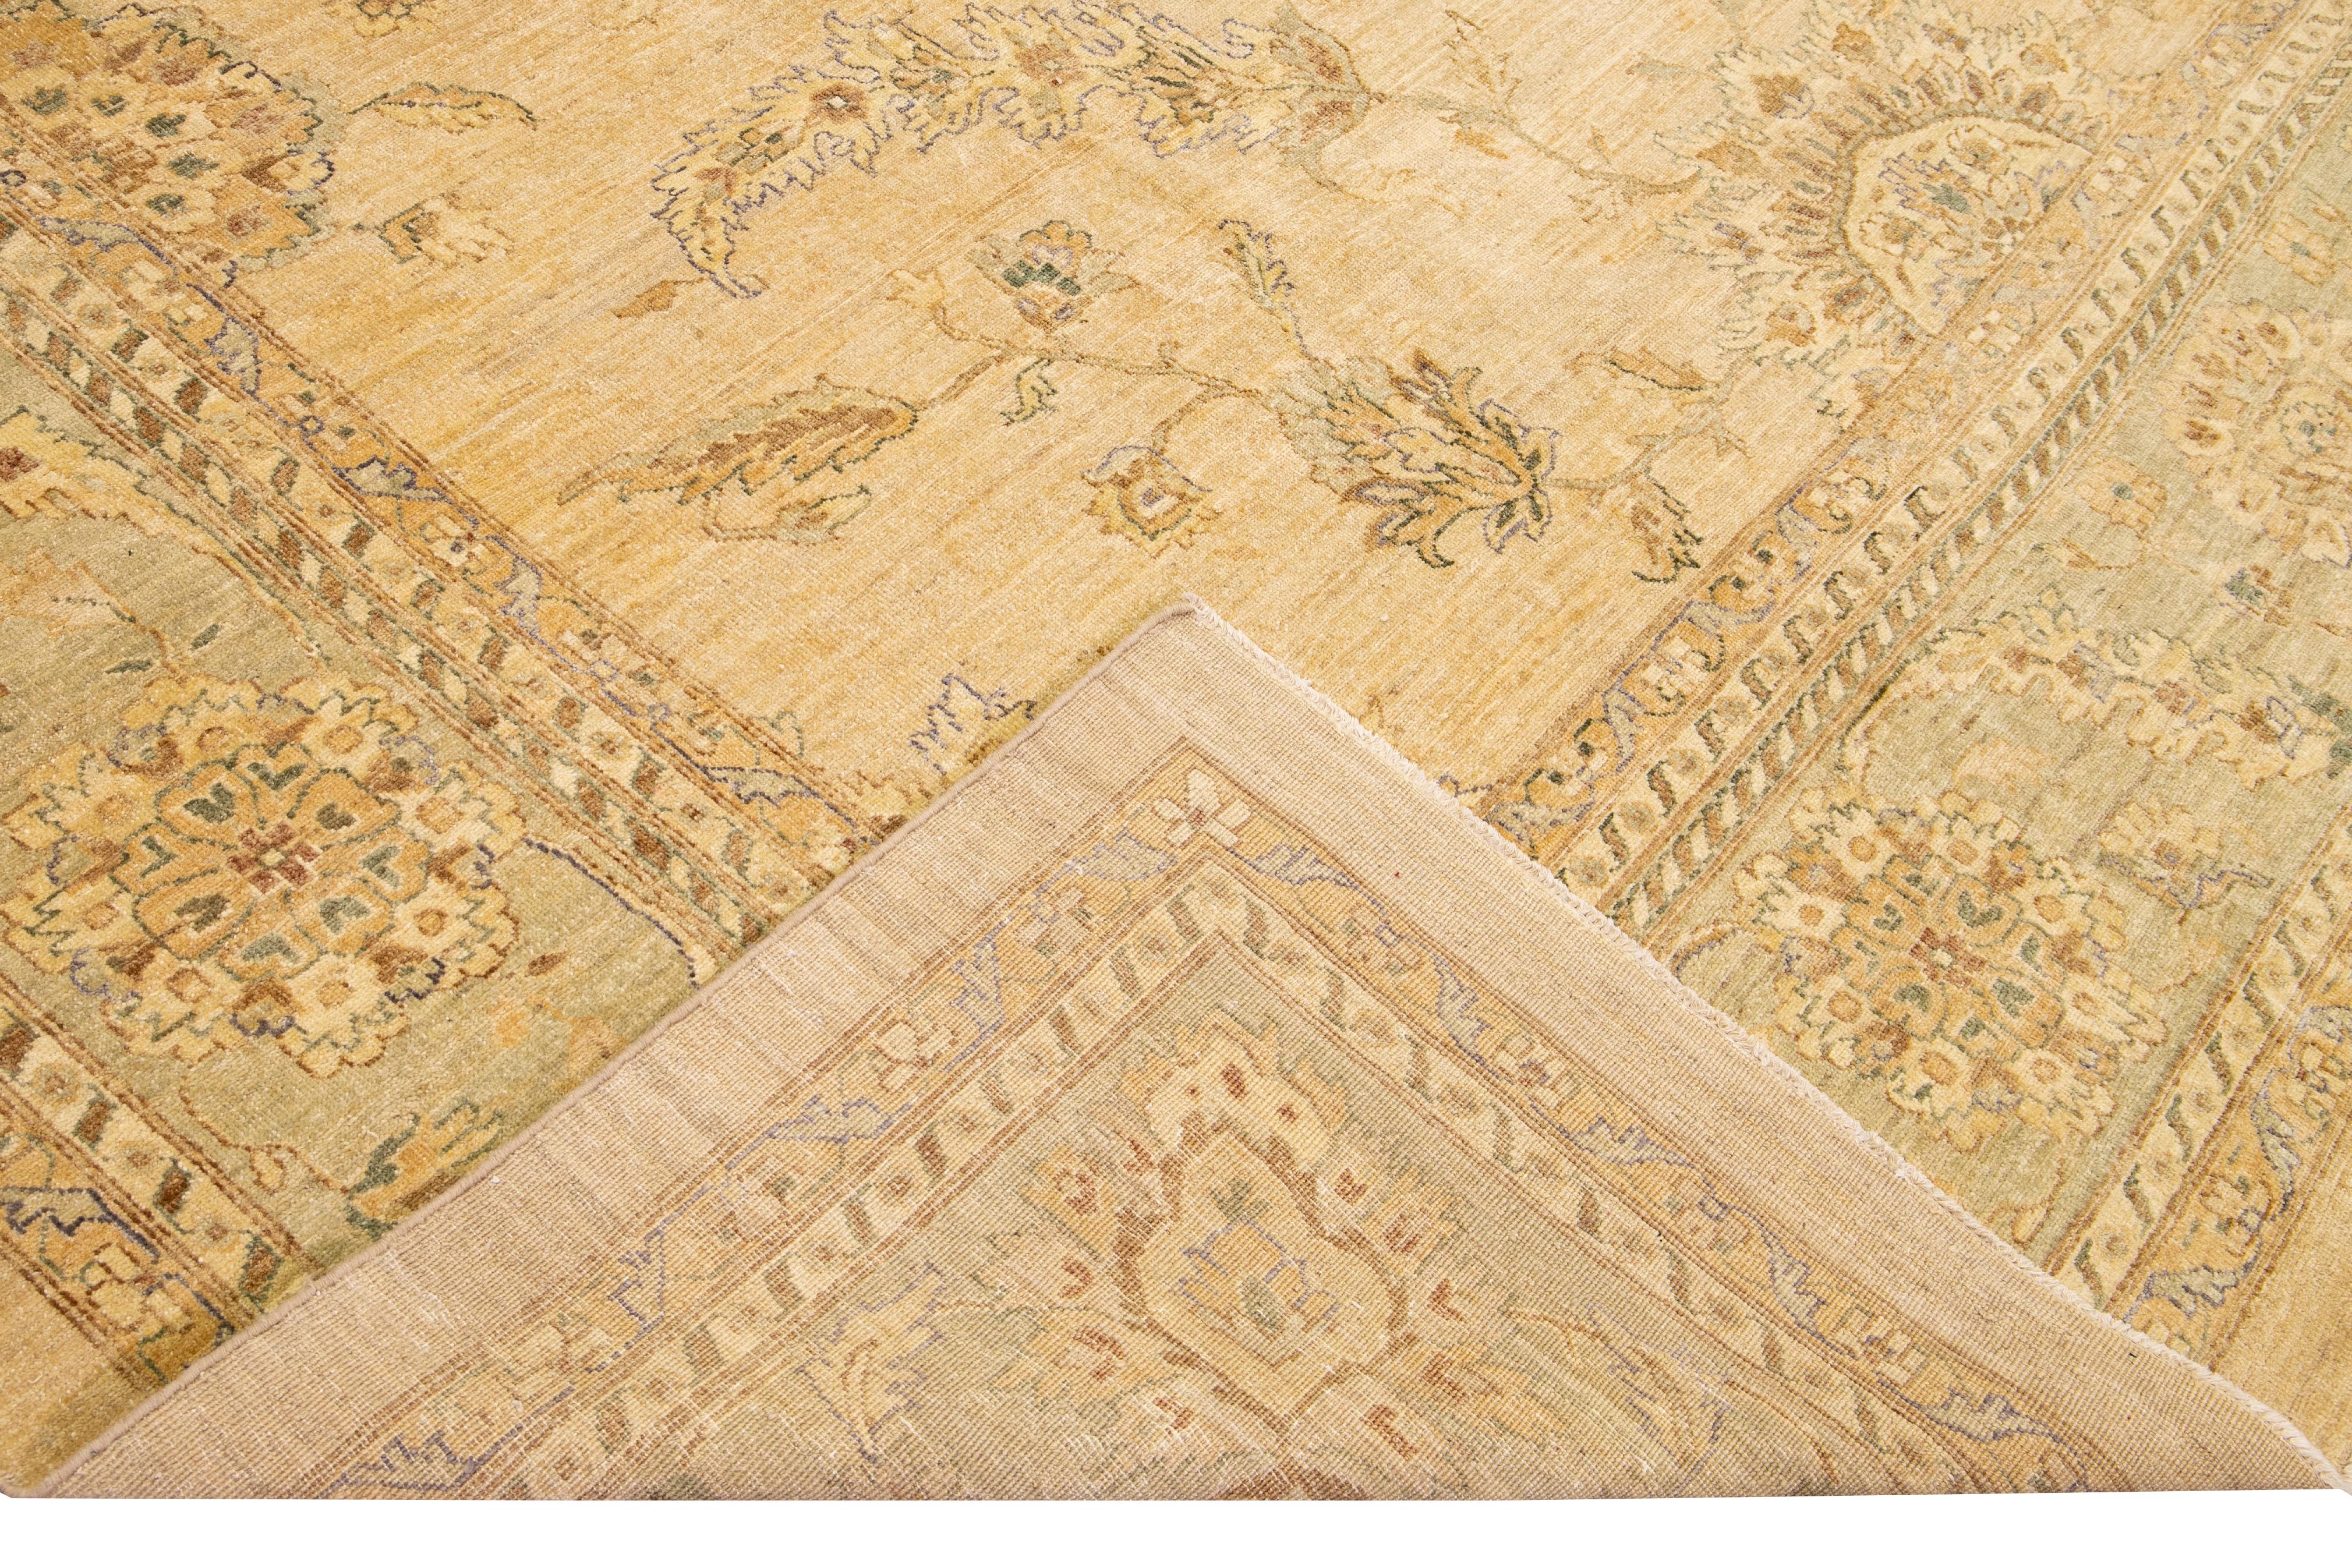 Beautiful Paki Peshawar hand-knotted wool rug with a beige field. This modern rug has tan and blue accents in a gorgeous all-over Classic vine scroll and a palmettes motif.

This rug measures: 11'8